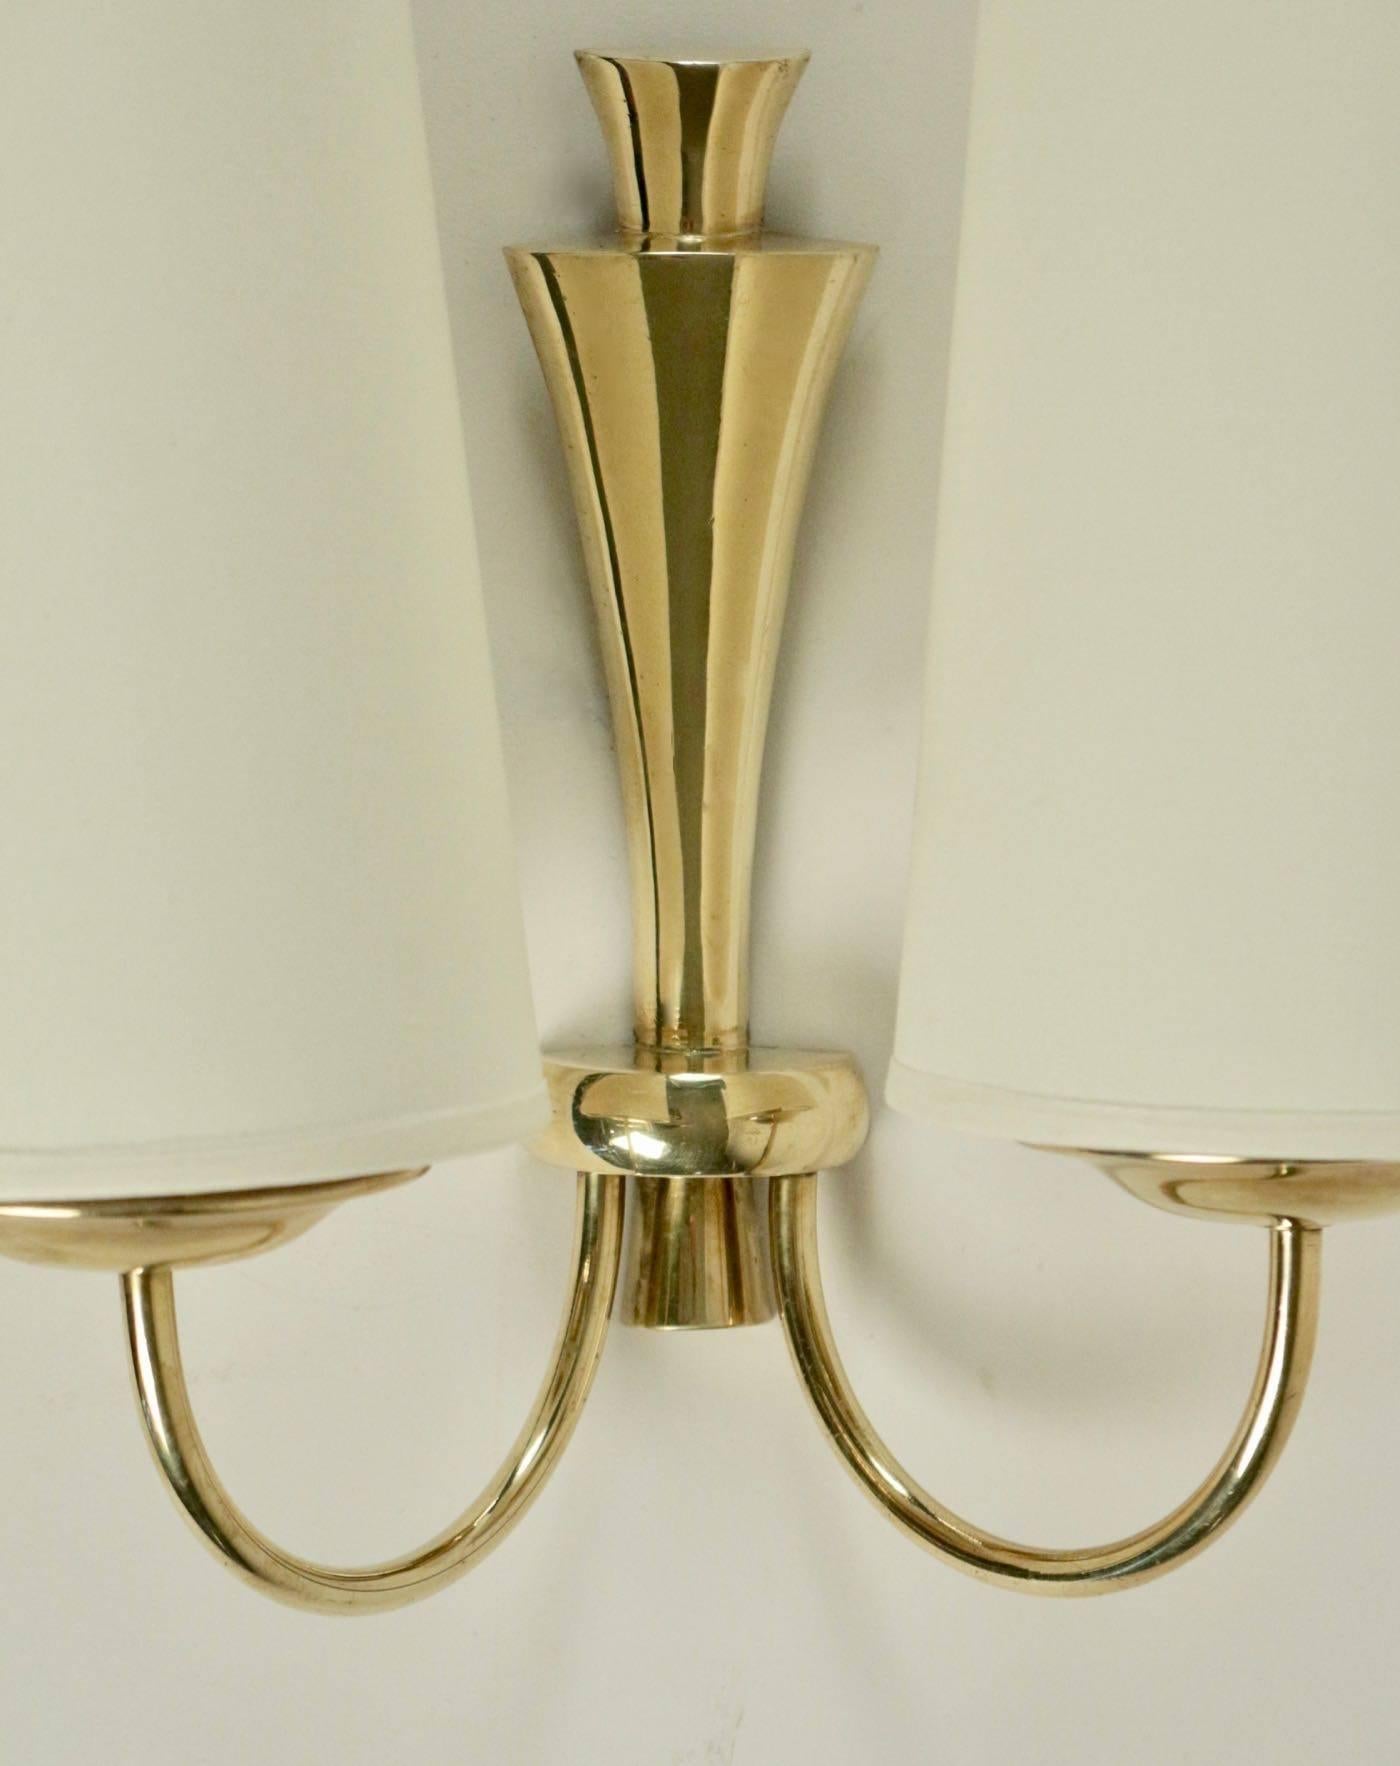 Pair of brass sconces Maison Arlus
Composed of a wall support in gilded brass receiving in the lower part two rising rods placed on either side of the gilded brass wall lamp. 
They are dressed with conical lampshades in off-white cotton and